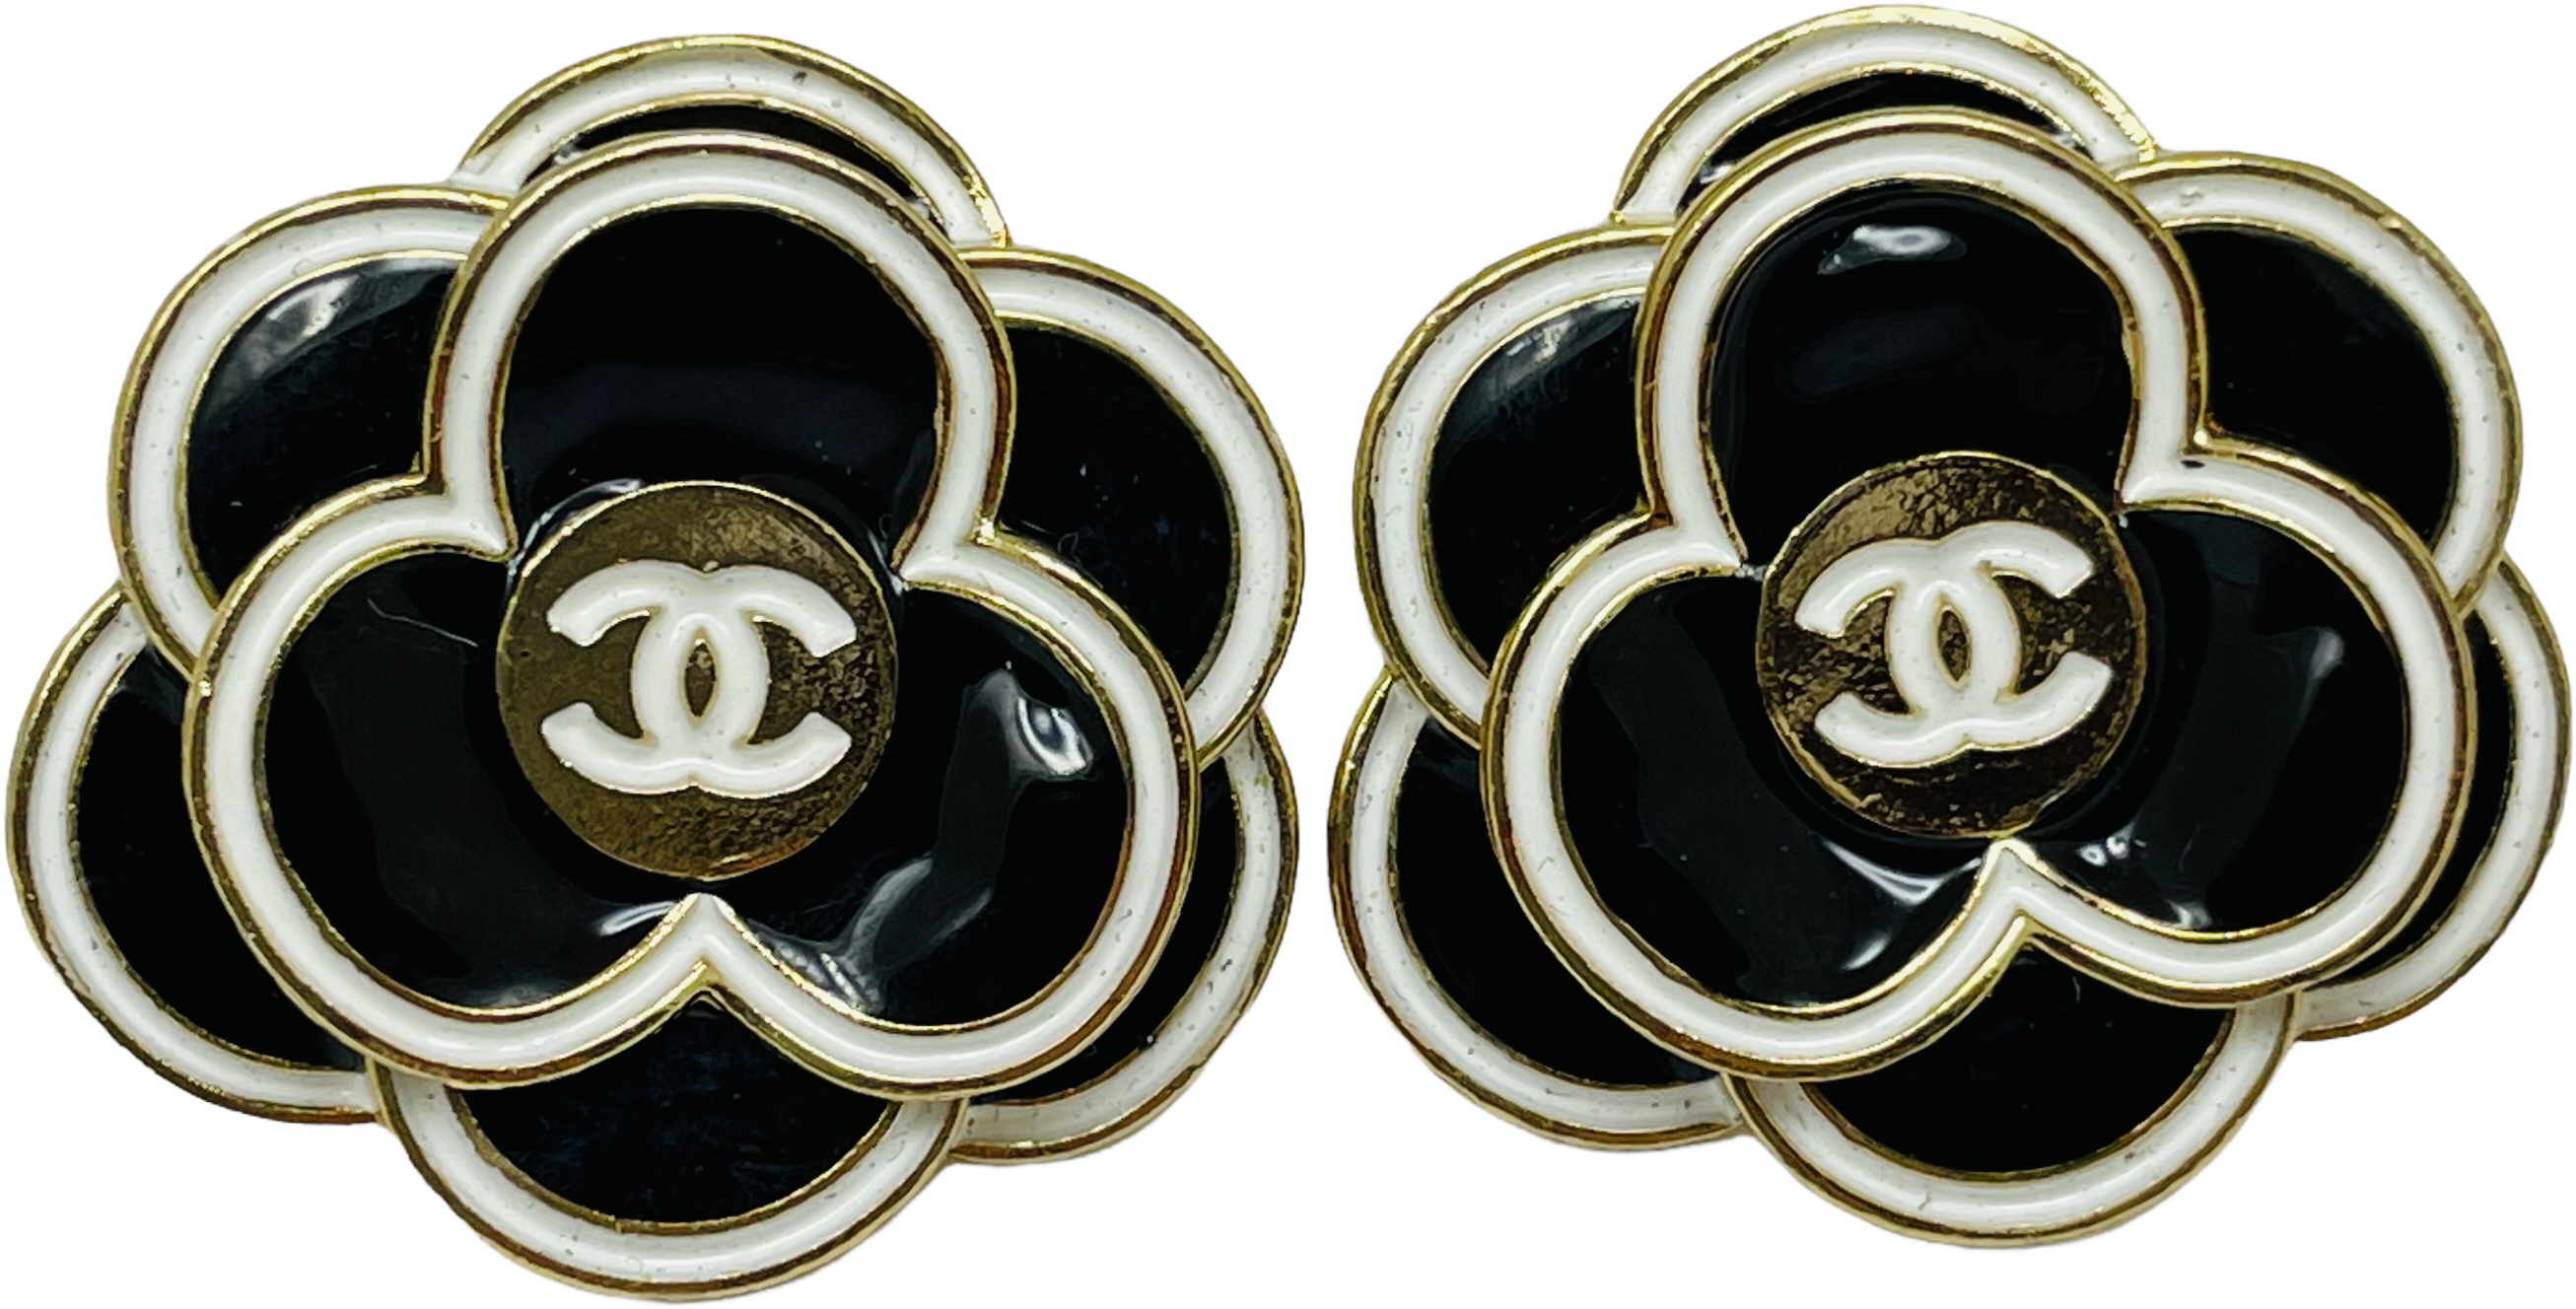 Vintage Chanel Cc Camellia Black Recycled Buttons Earrings